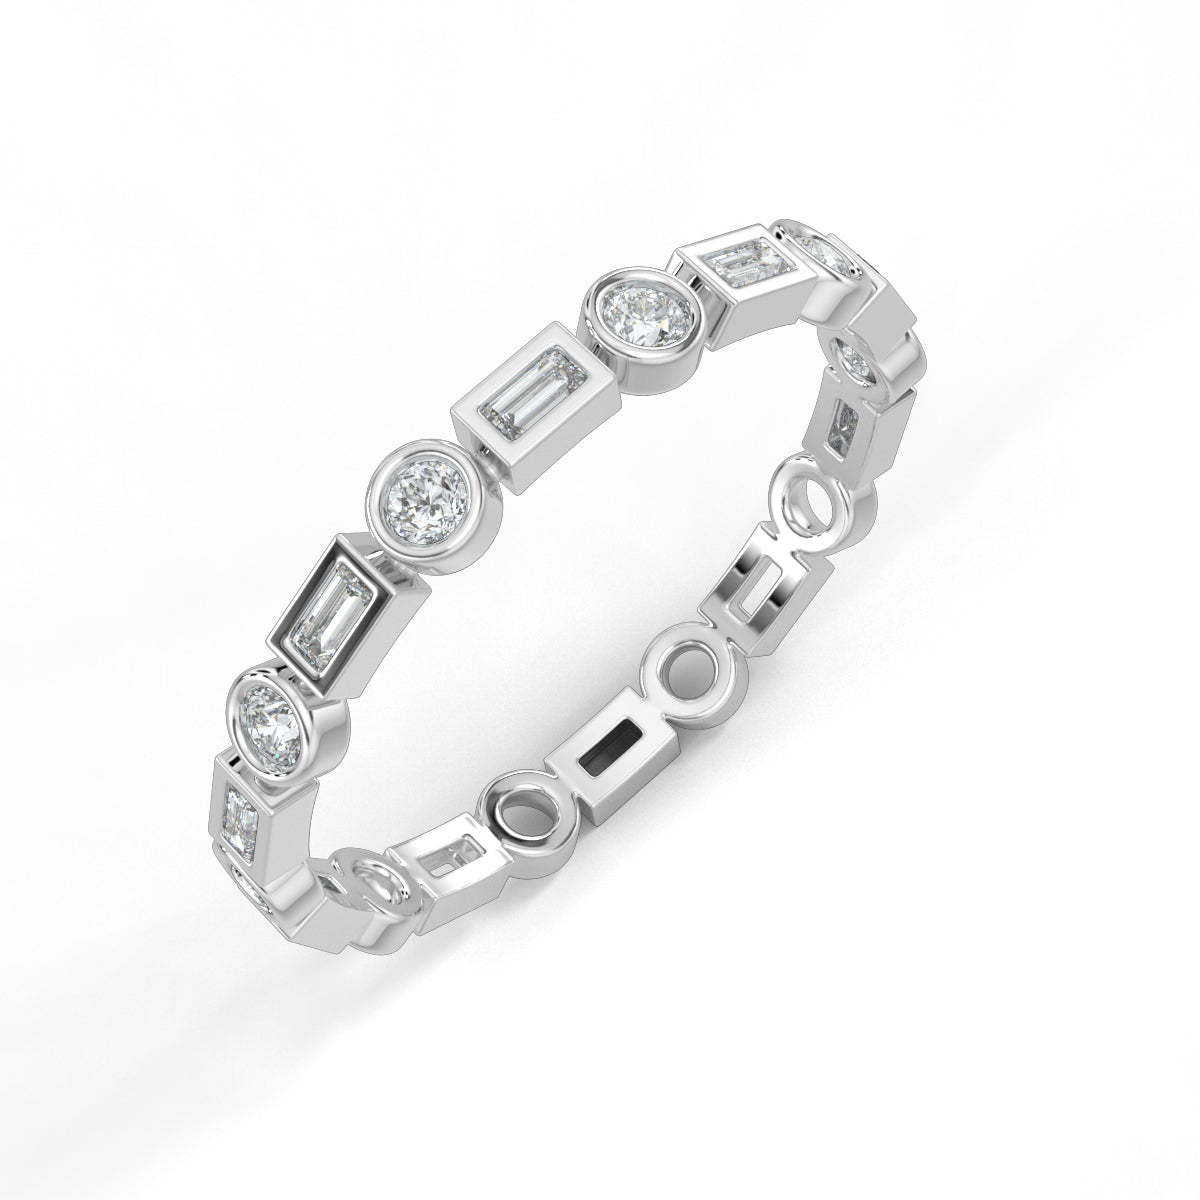 White Gold, Diamond Ring, natural diamond eternity band, Lab-grown diamond eternity band, round diamond, baguette diamond, everyday ring, timeless elegance, sophisticated jewelry